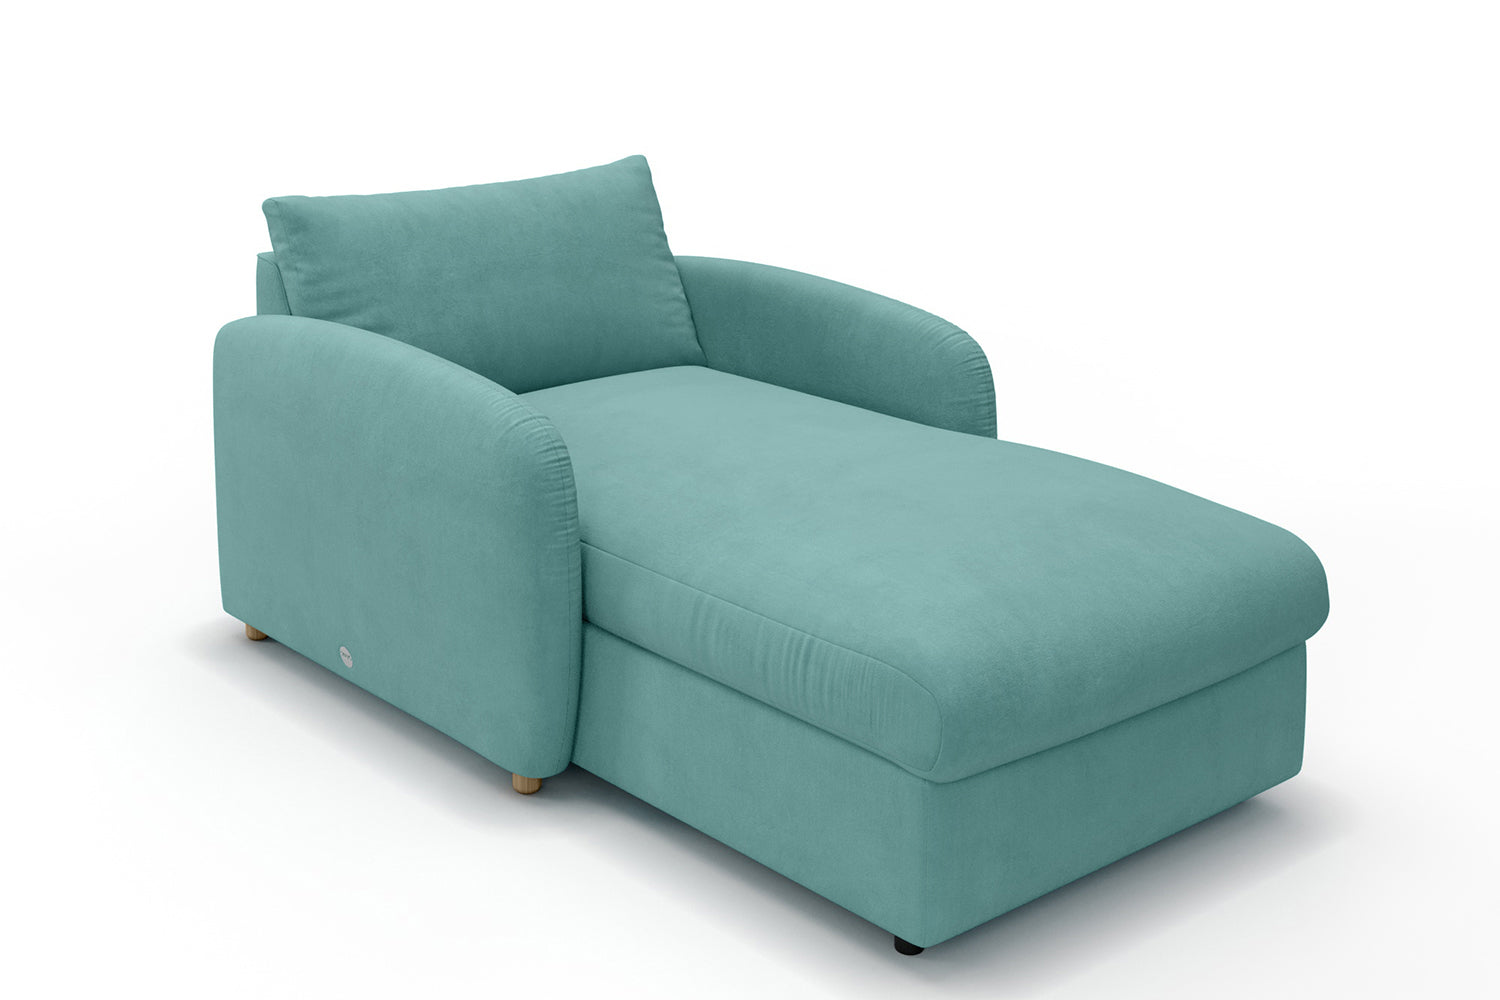 SNUG | The Small Biggie Chaise Longue in Soft Teal